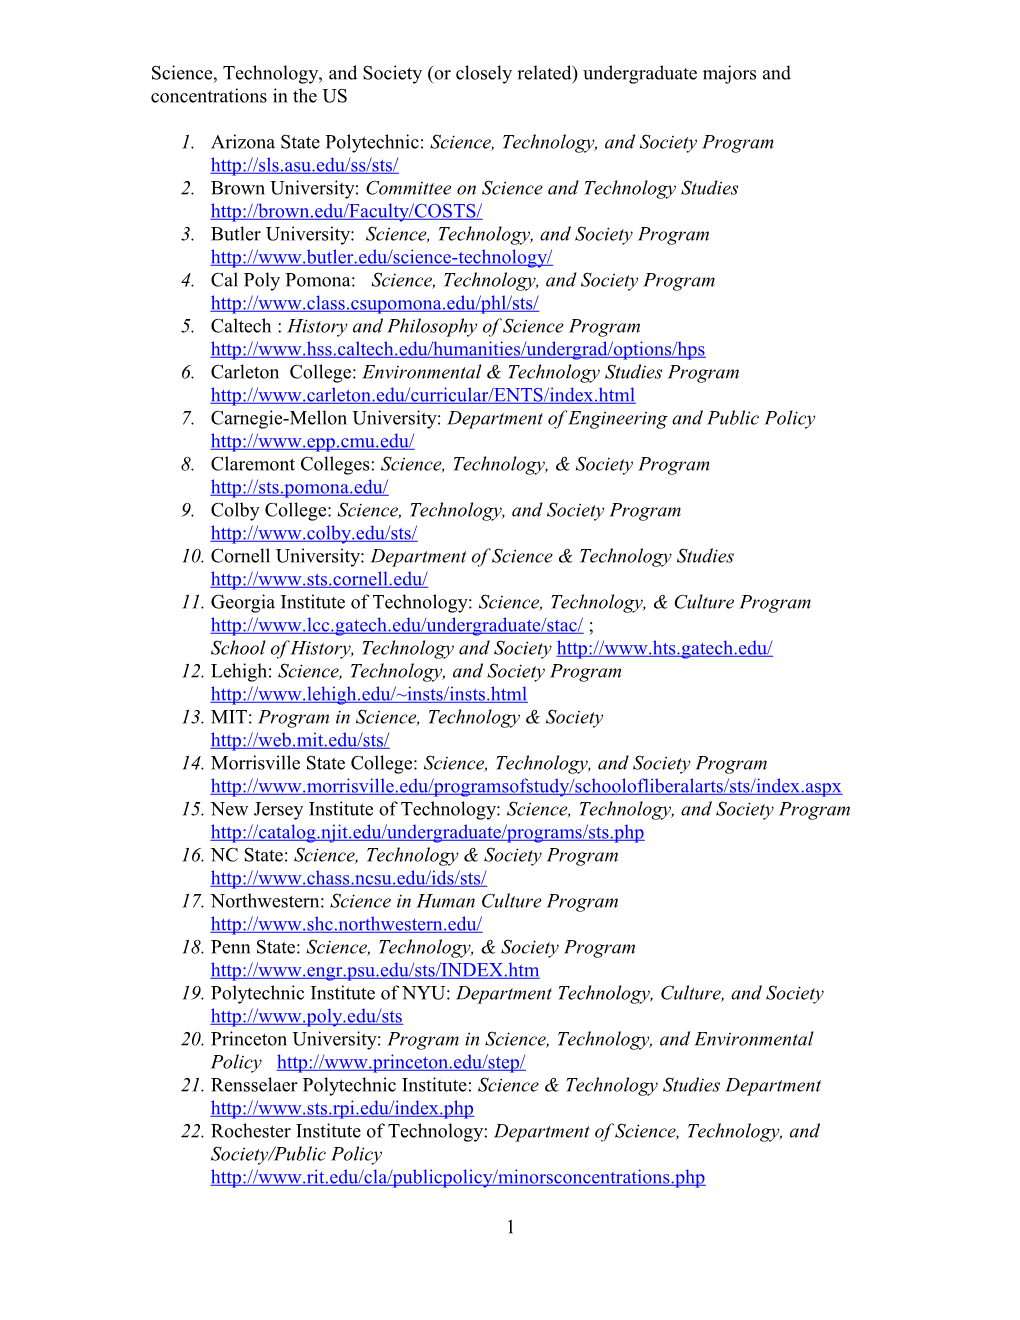 Science, Technology, and Society (Or Closely Related) Undergraduate Majors and Concentrations